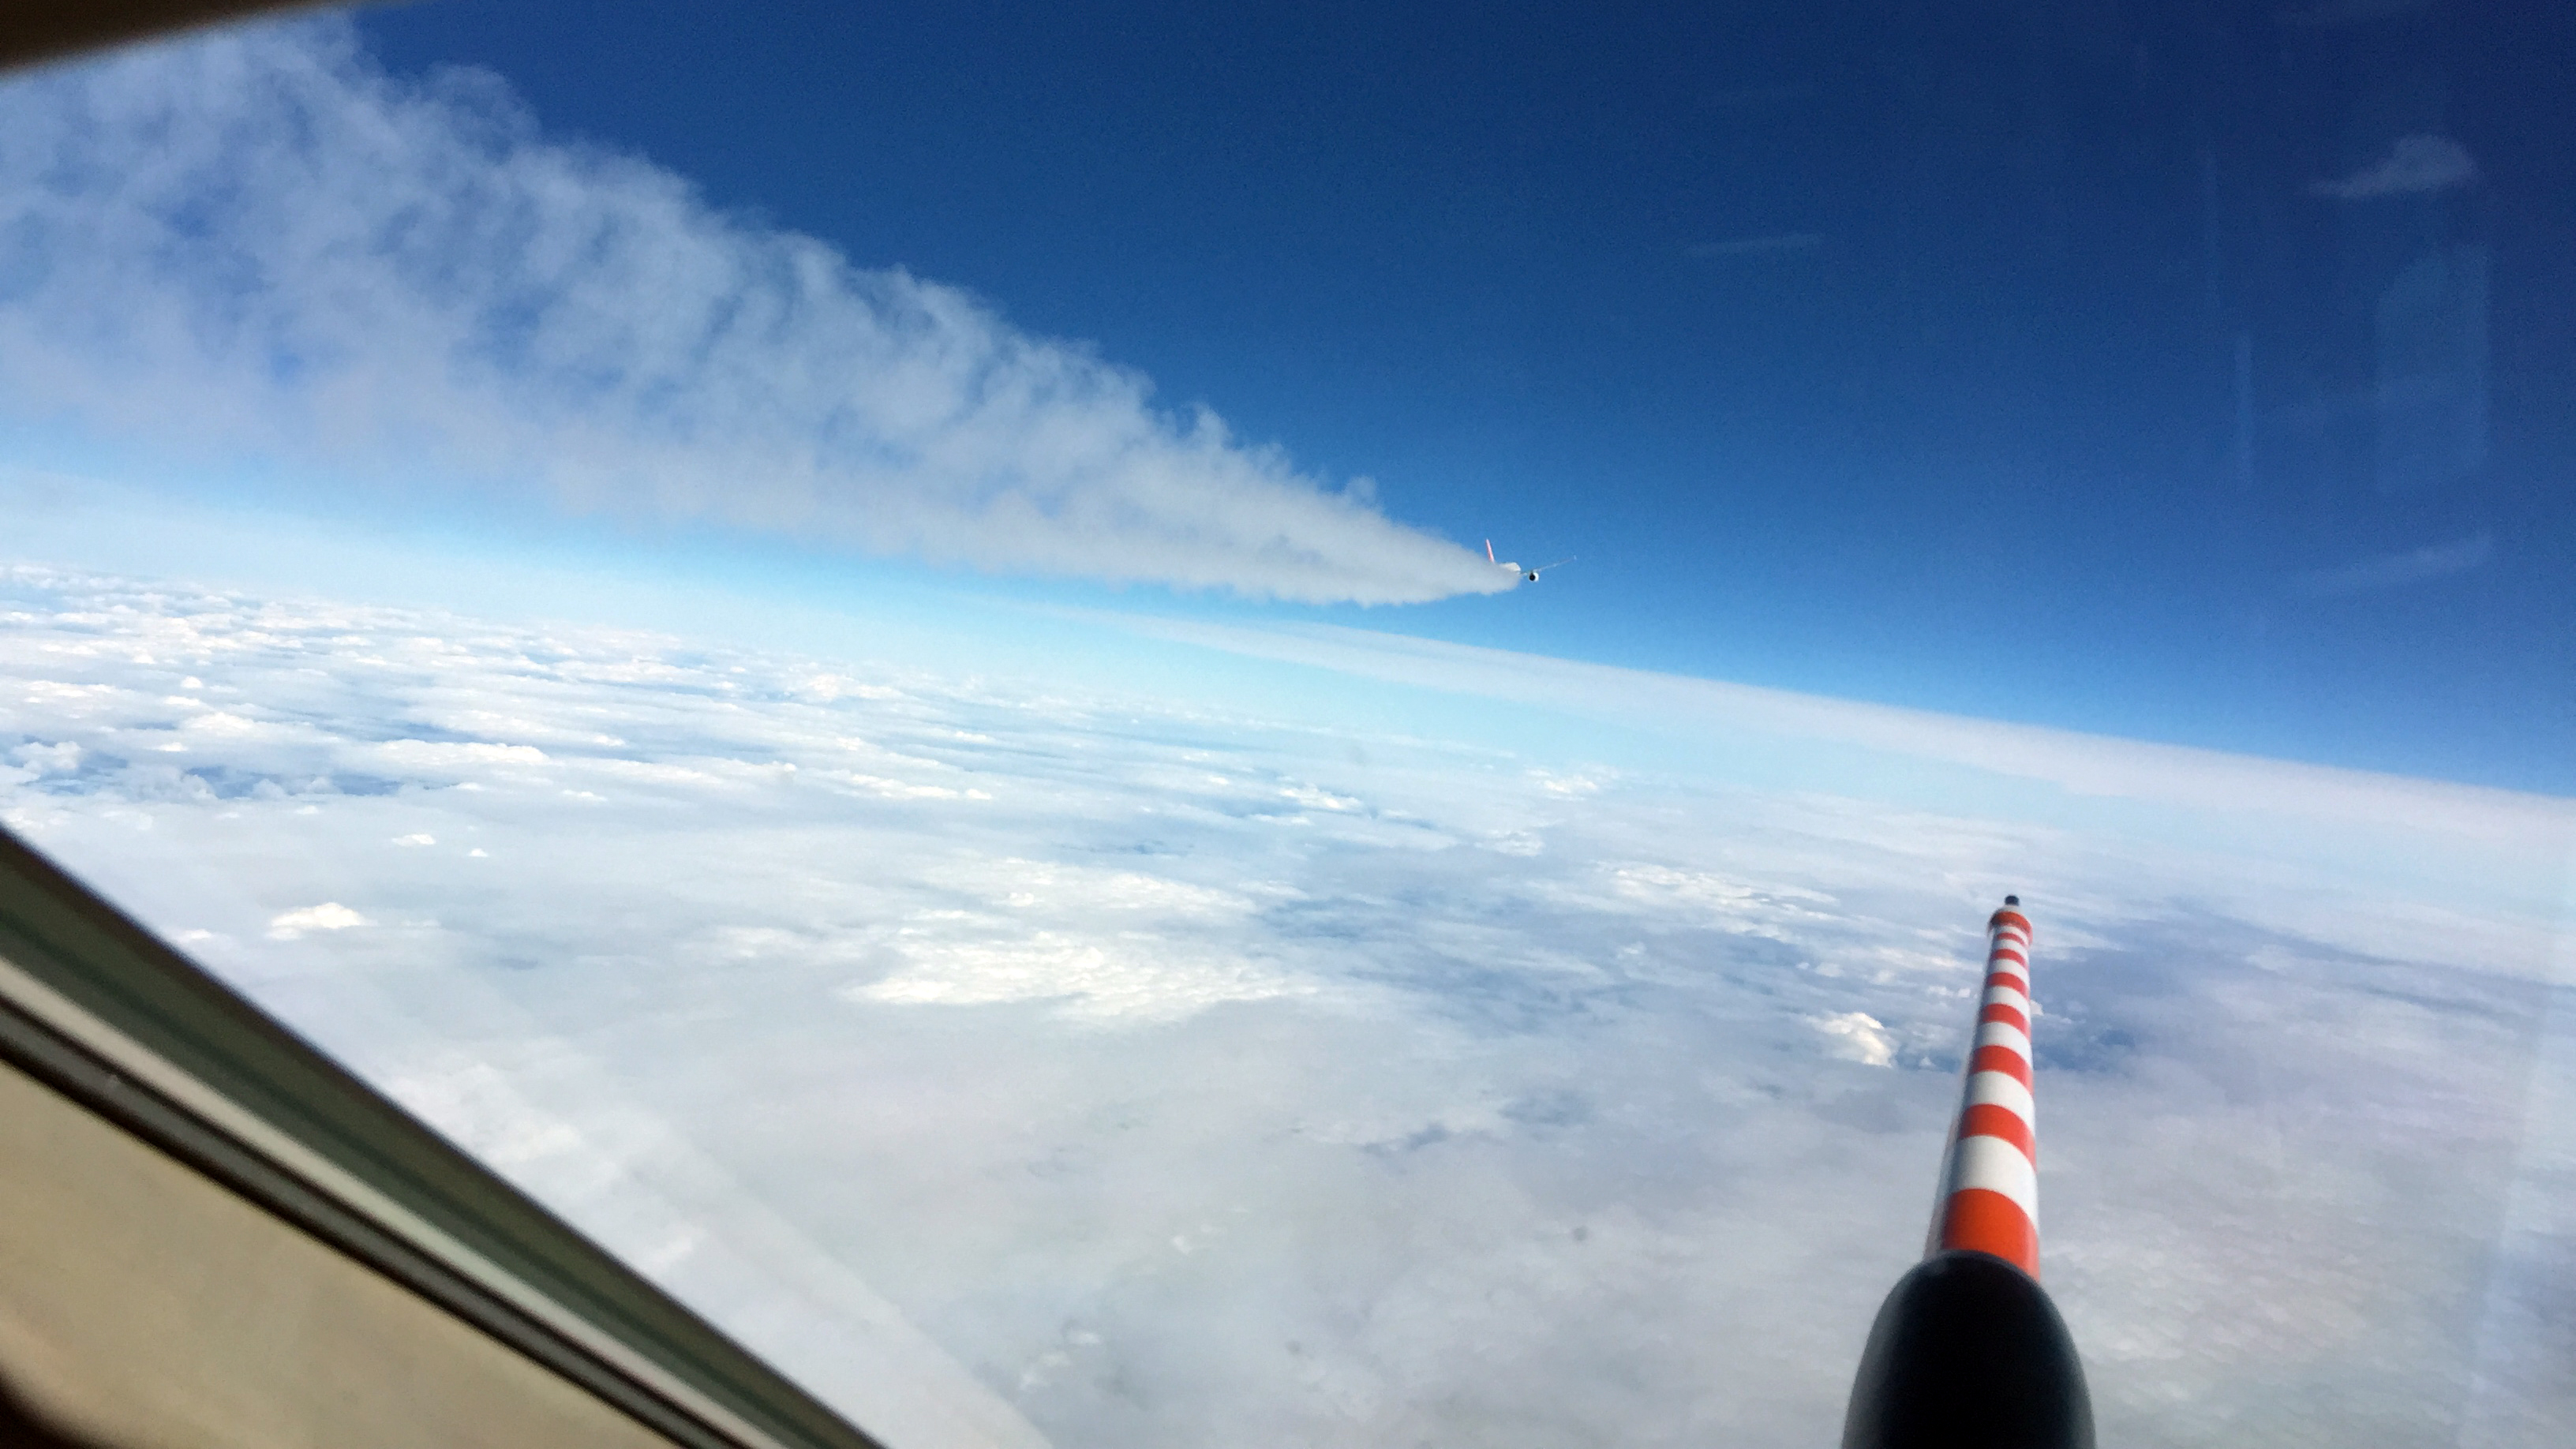 The view of the A320 ATRA’s exhaust plume.